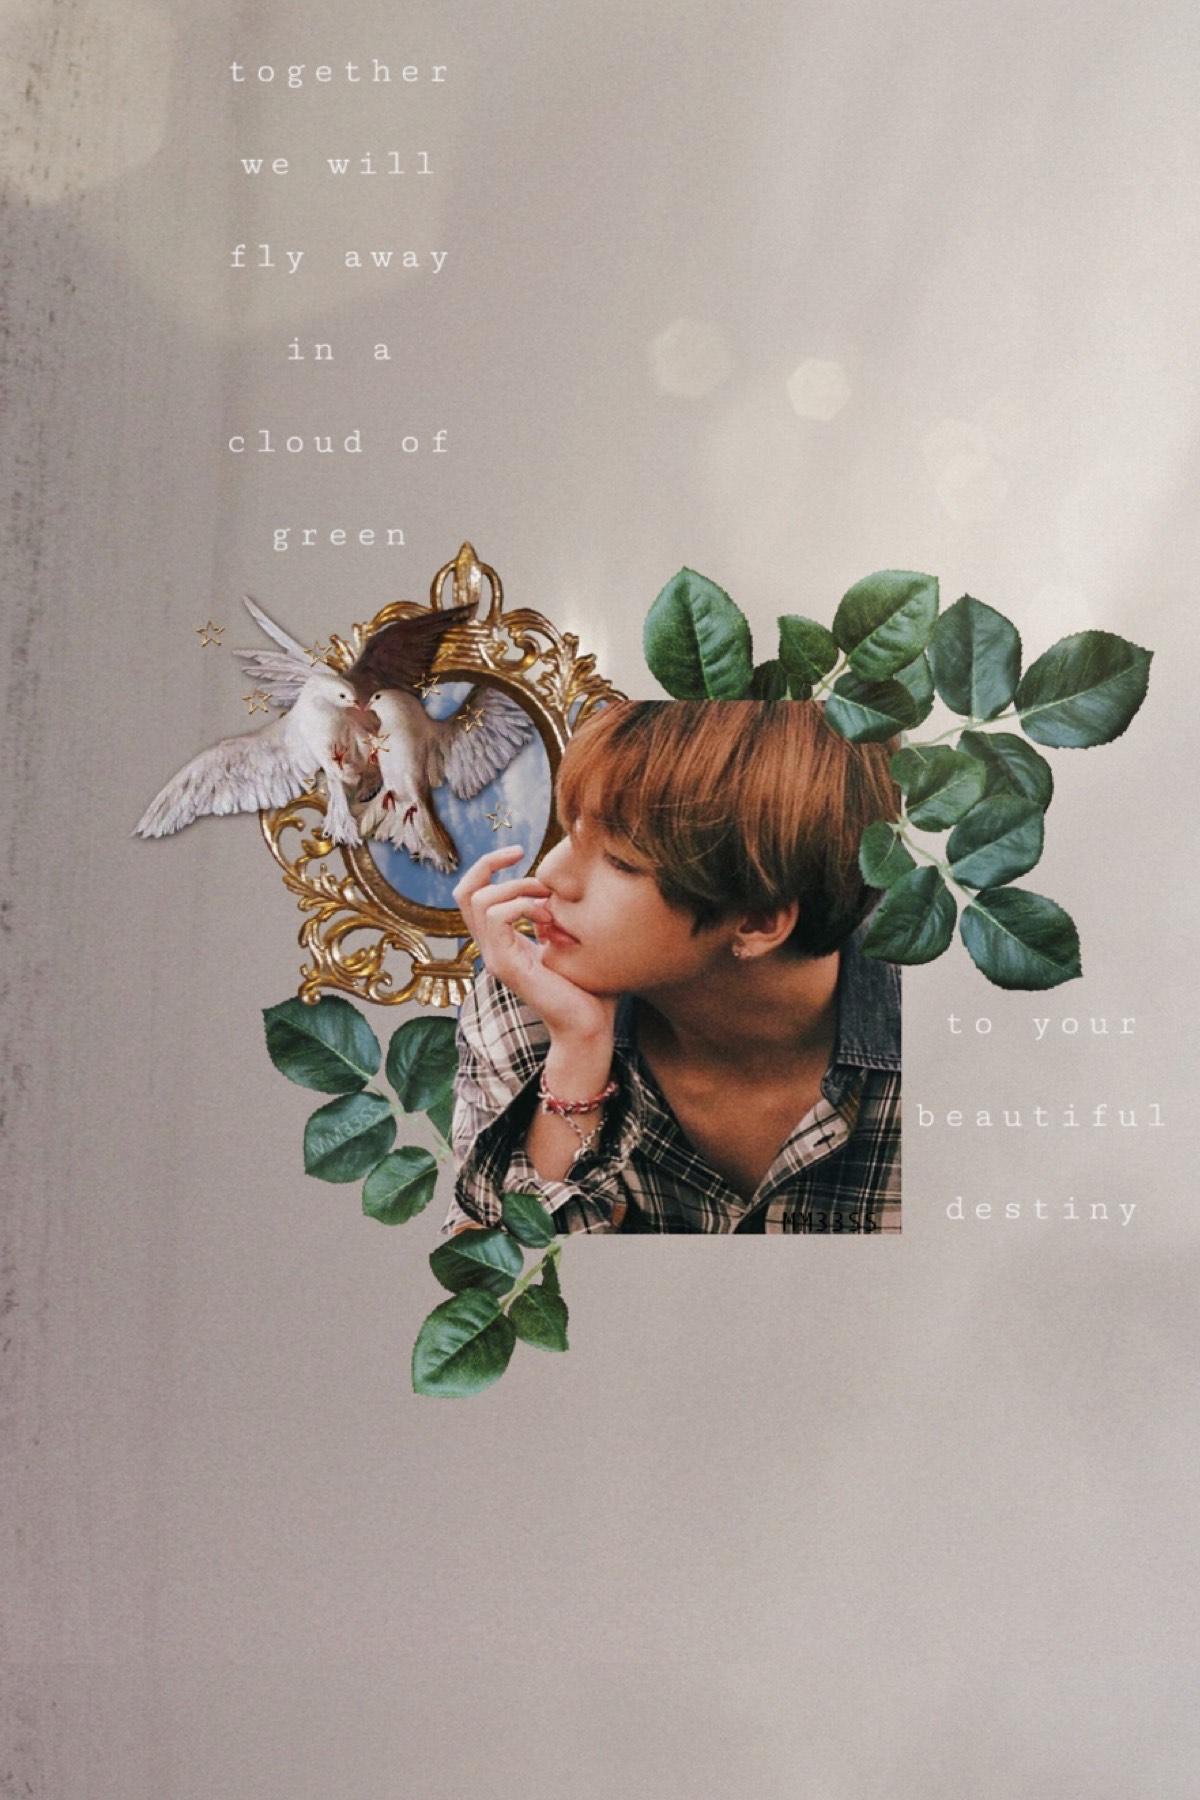 lost boy / ruth b. / May 27, 2020

so, this did not turn out as planned...

image: kim taehyung (V)